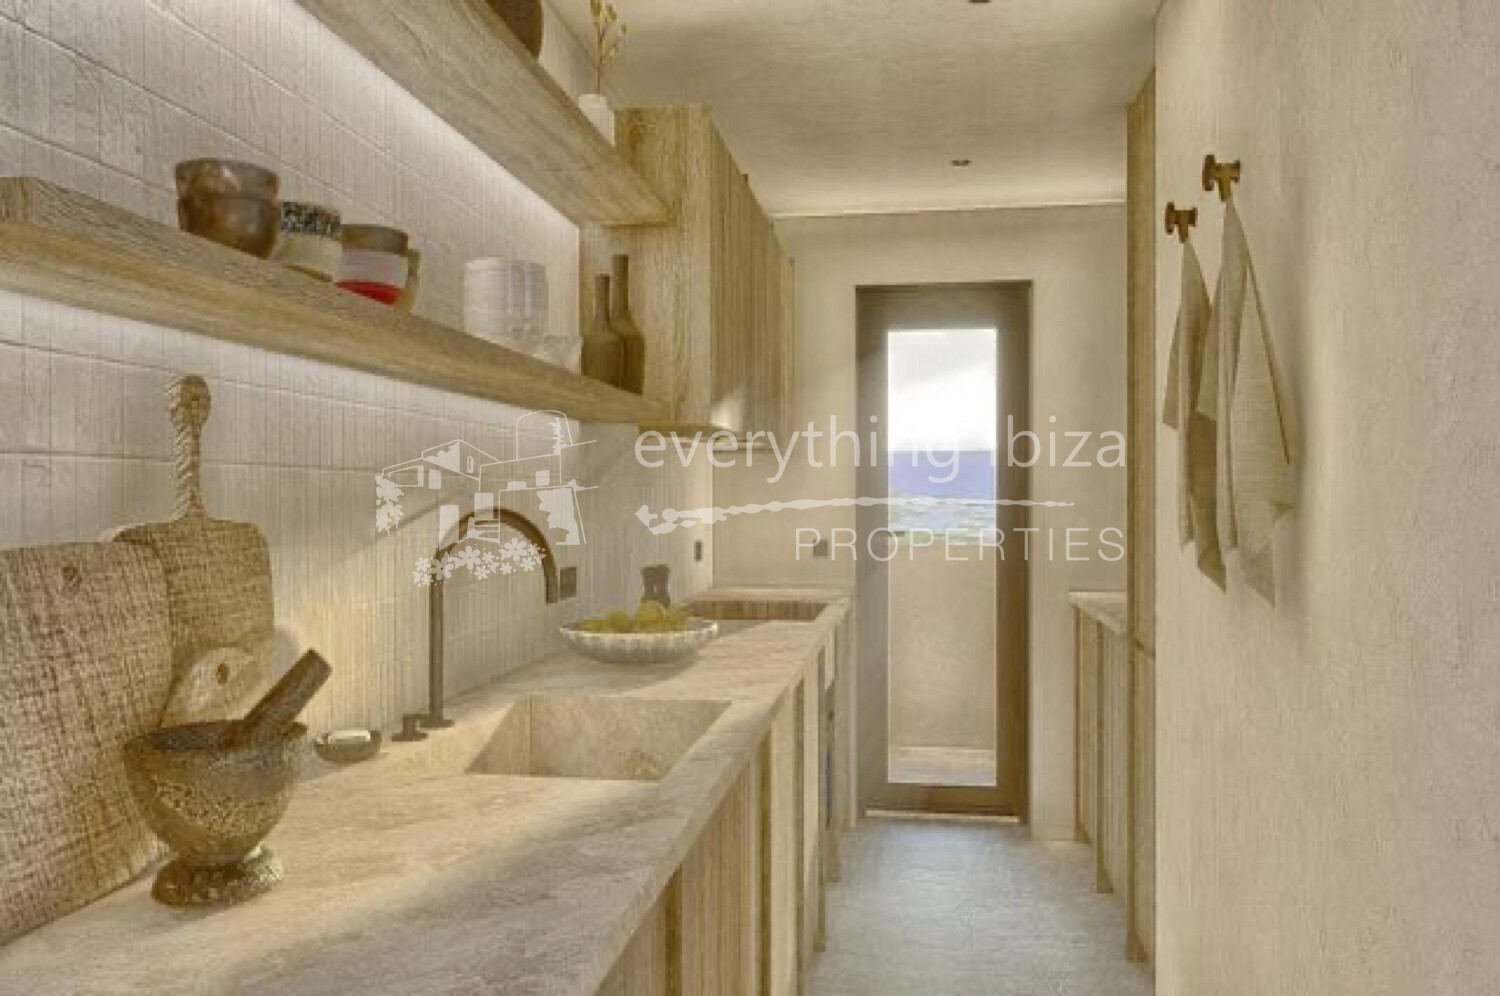 Beautifully Refurbished Apartment in Cap Martinet with Sea Views, ref. 1606, for sale in Ibiza by everything ibiza Properties